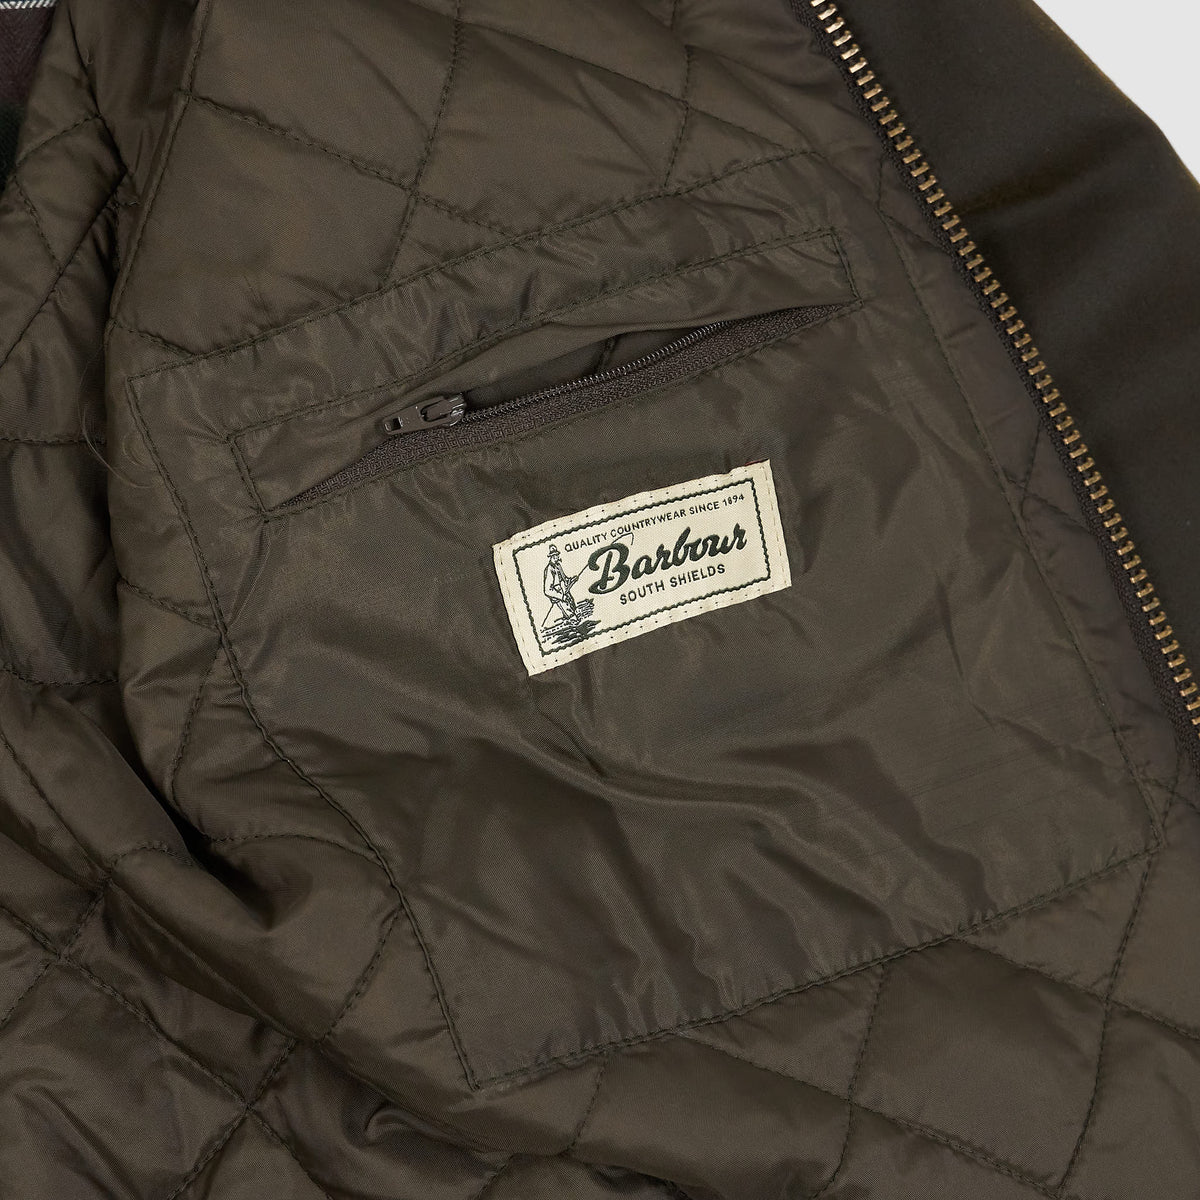 Barbour Quilted Wax-Jacket